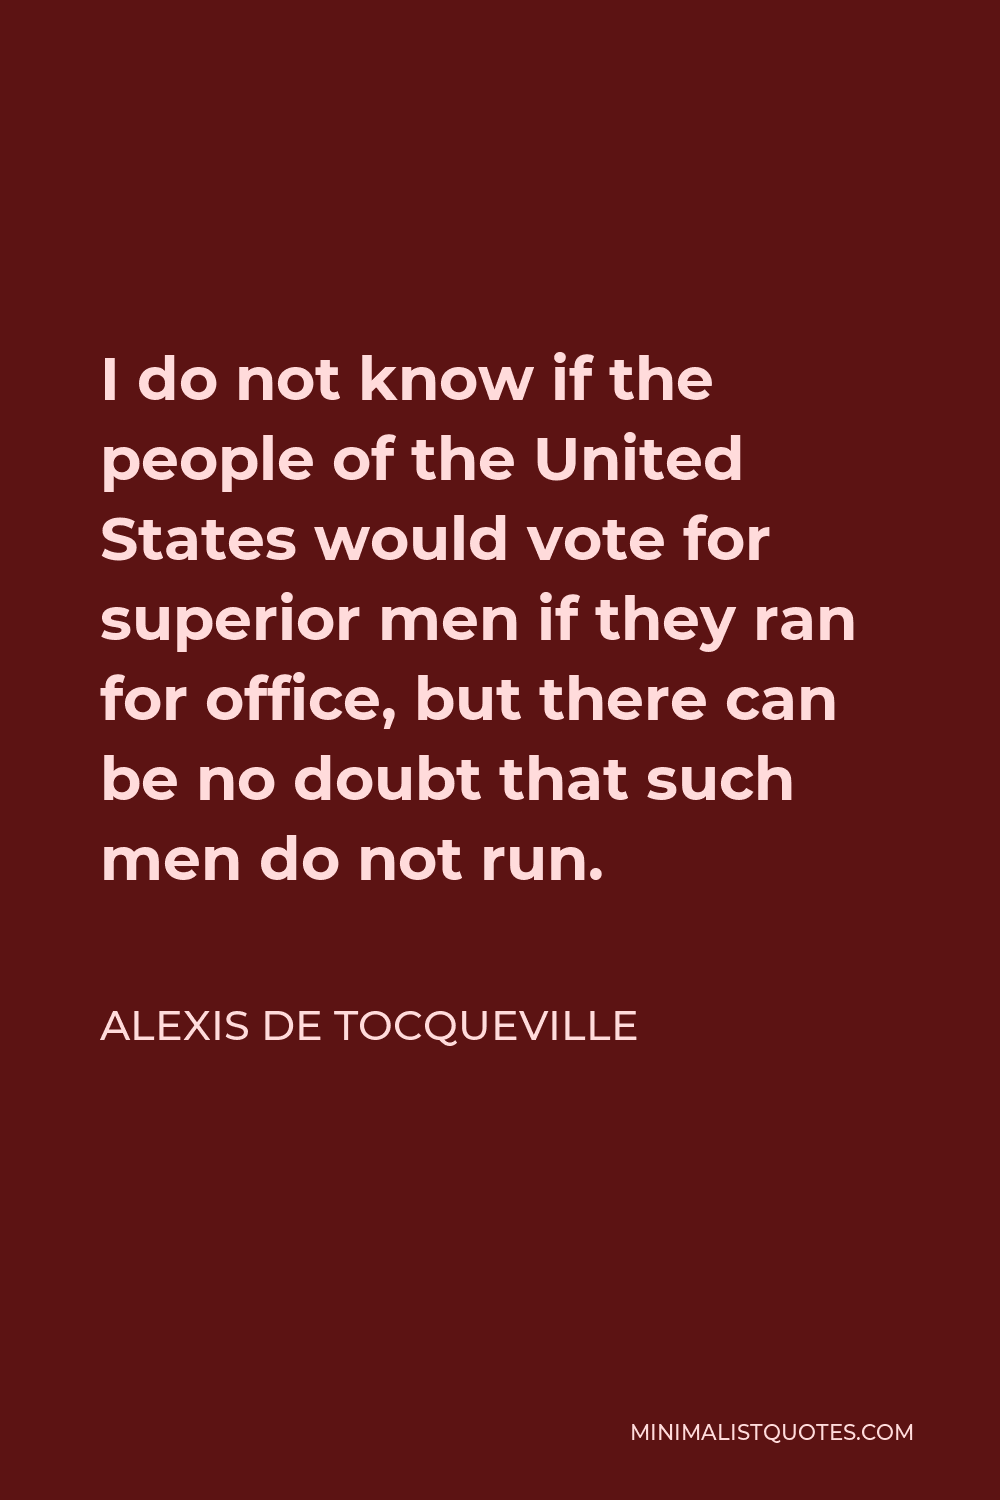 Alexis de Tocqueville Quote - I do not know if the people of the United States would vote for superior men if they ran for office, but there can be no doubt that such men do not run.